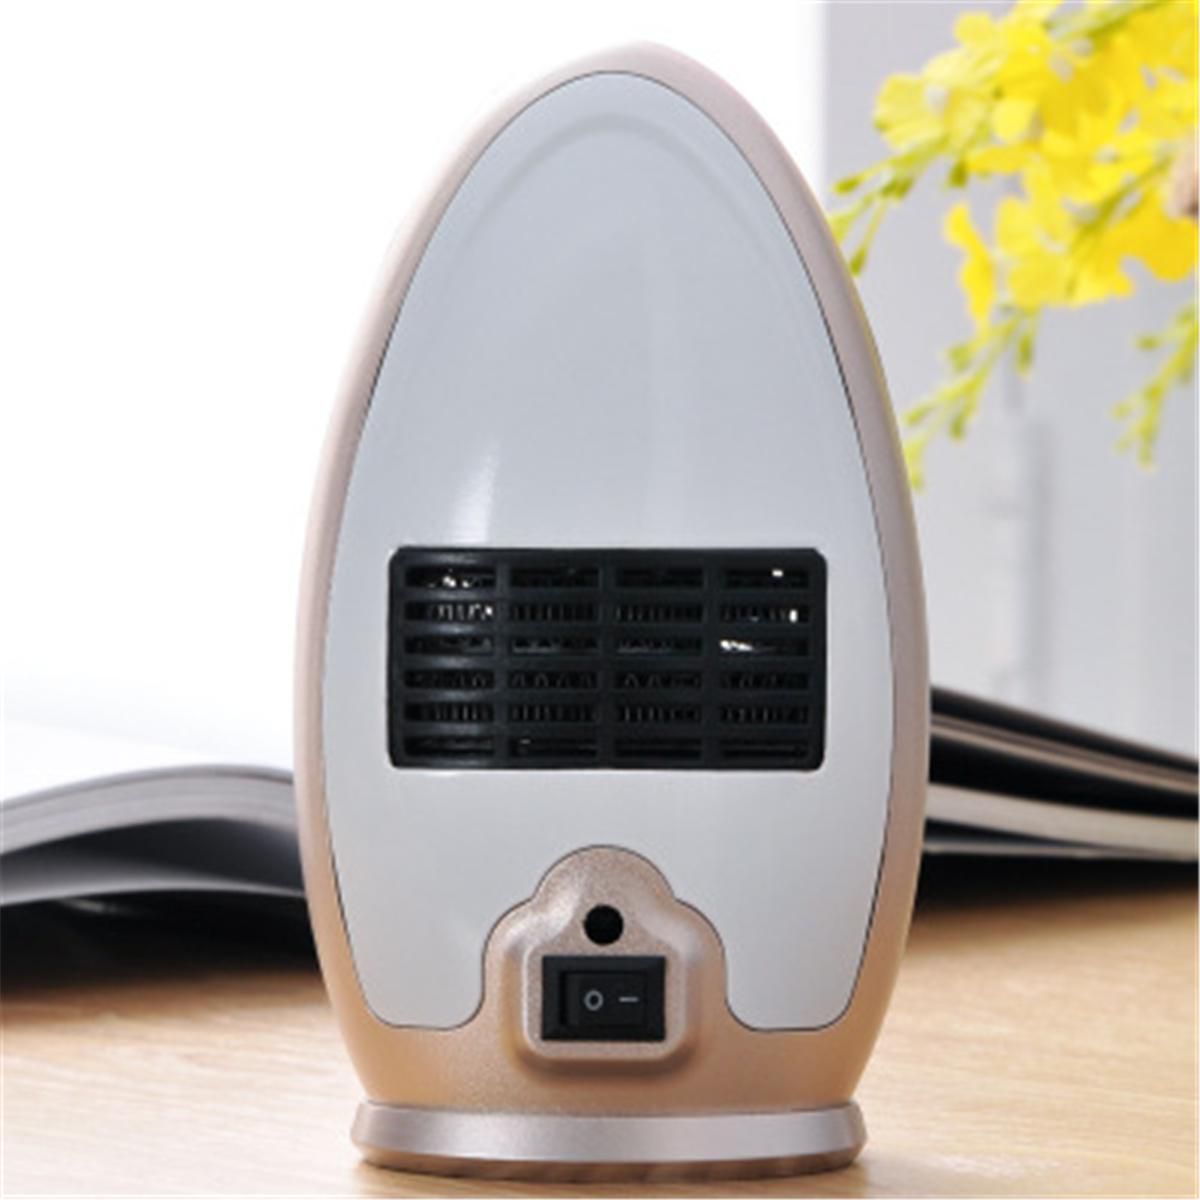 Pictures Of Electric Fireplaces Best Of Electric Mini Heater Warmer Fan Portable Silent Home Fice Desktop Fireplace